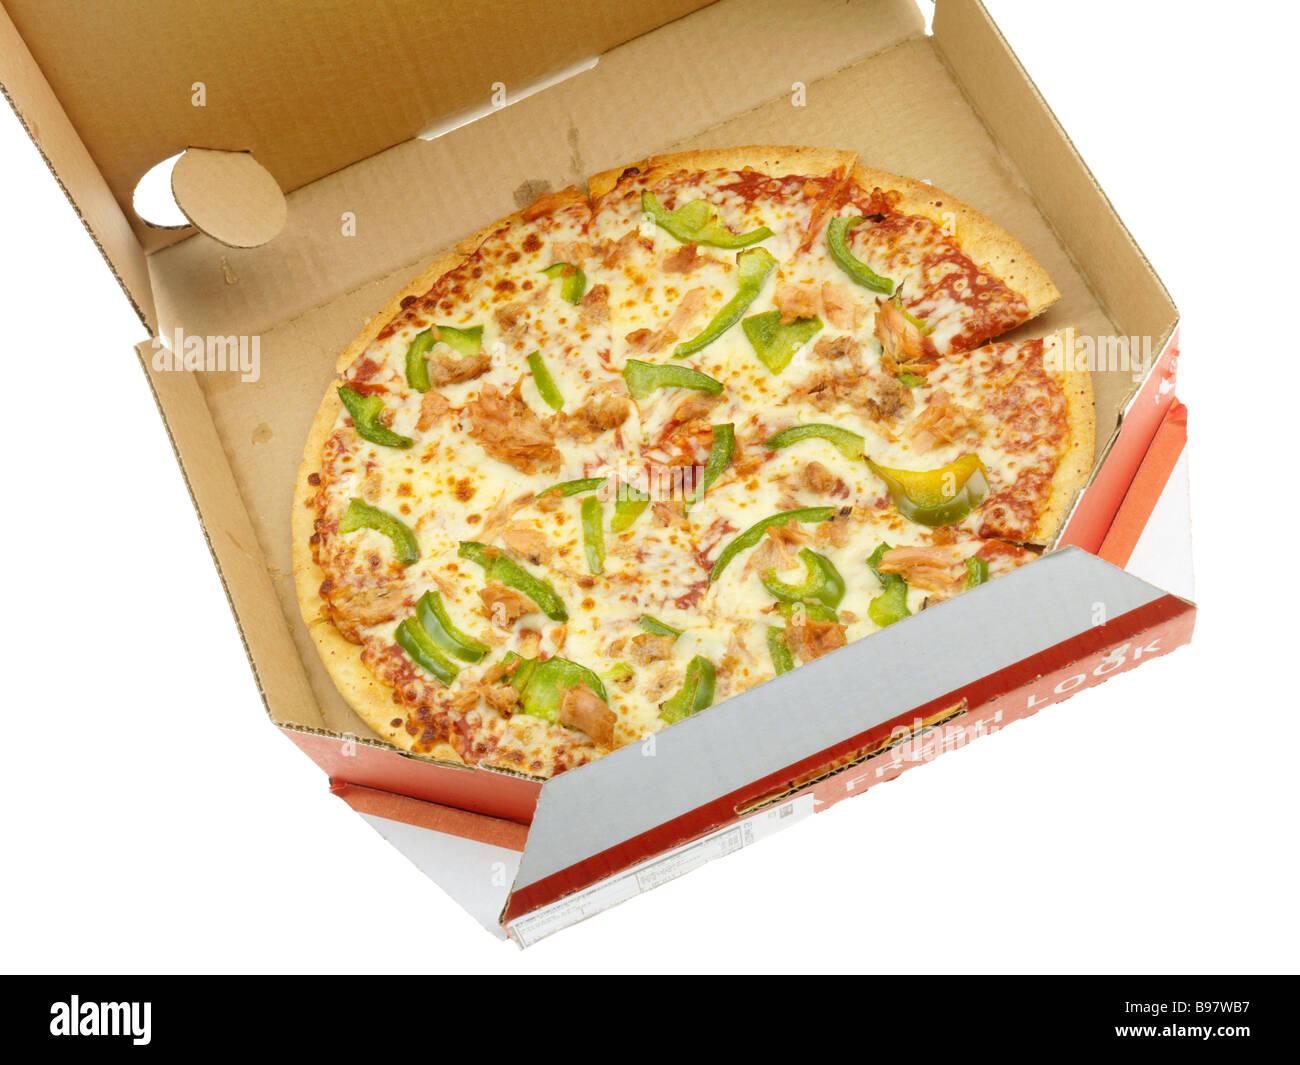 Branded Dominos Takeaway Home Delivery Pizza Carton Or Box  Isolated Against A White Background With No People And A Clipping Path Stock Photo